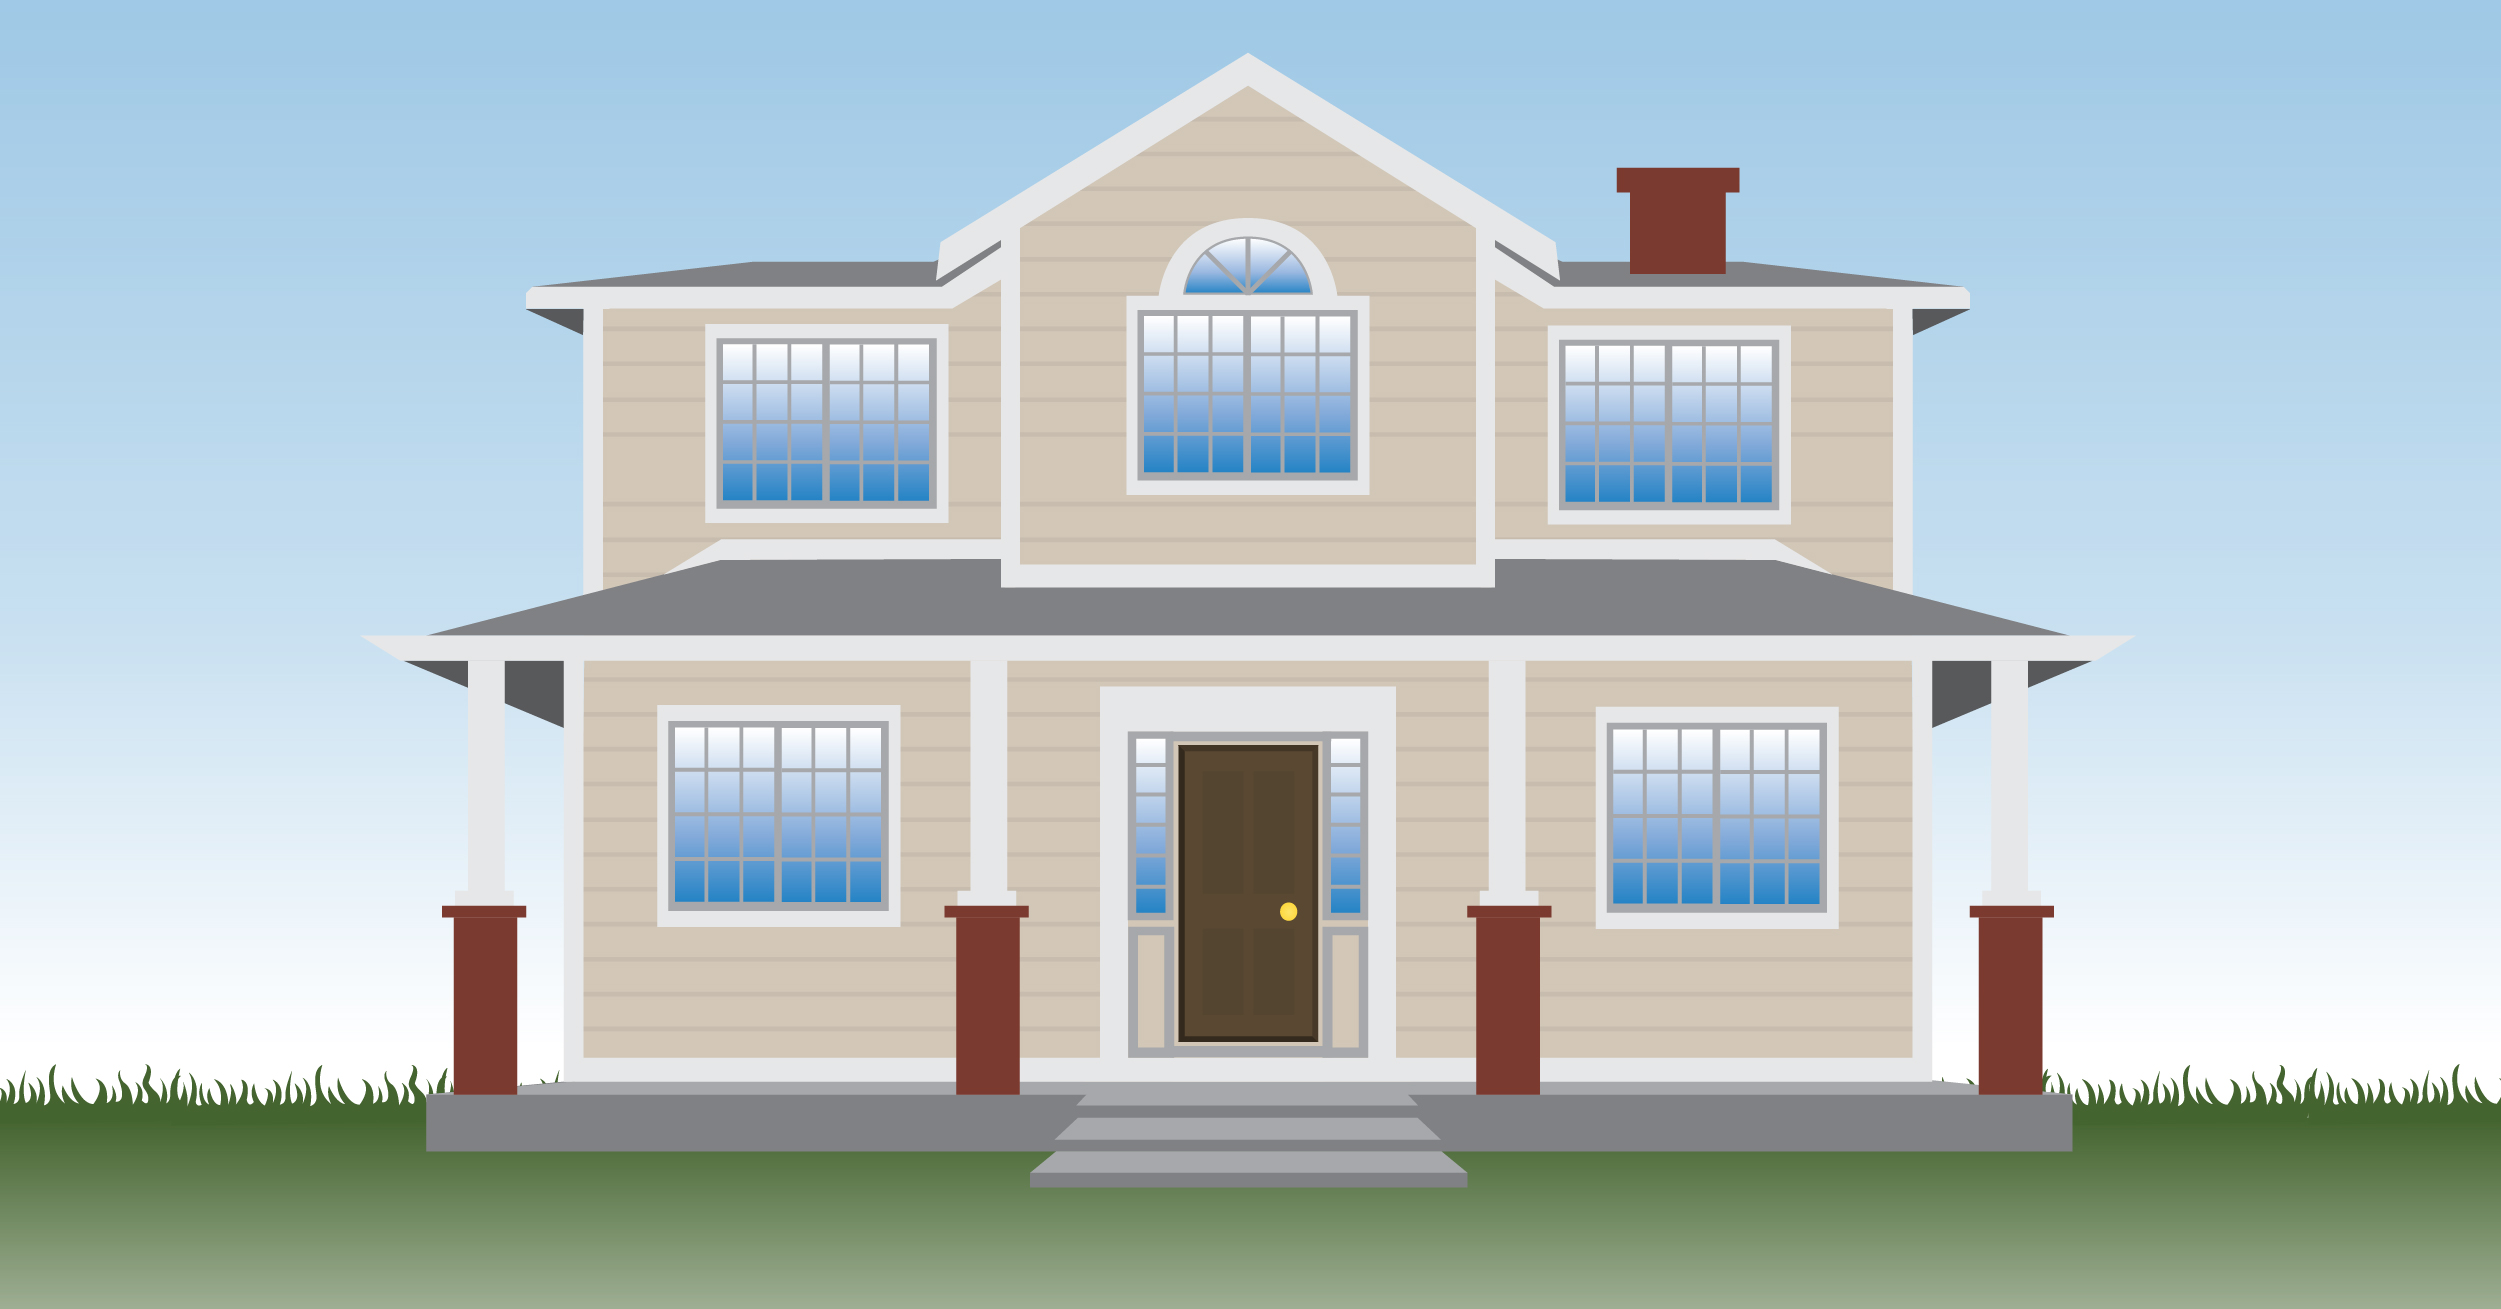 Animated graphic of a house